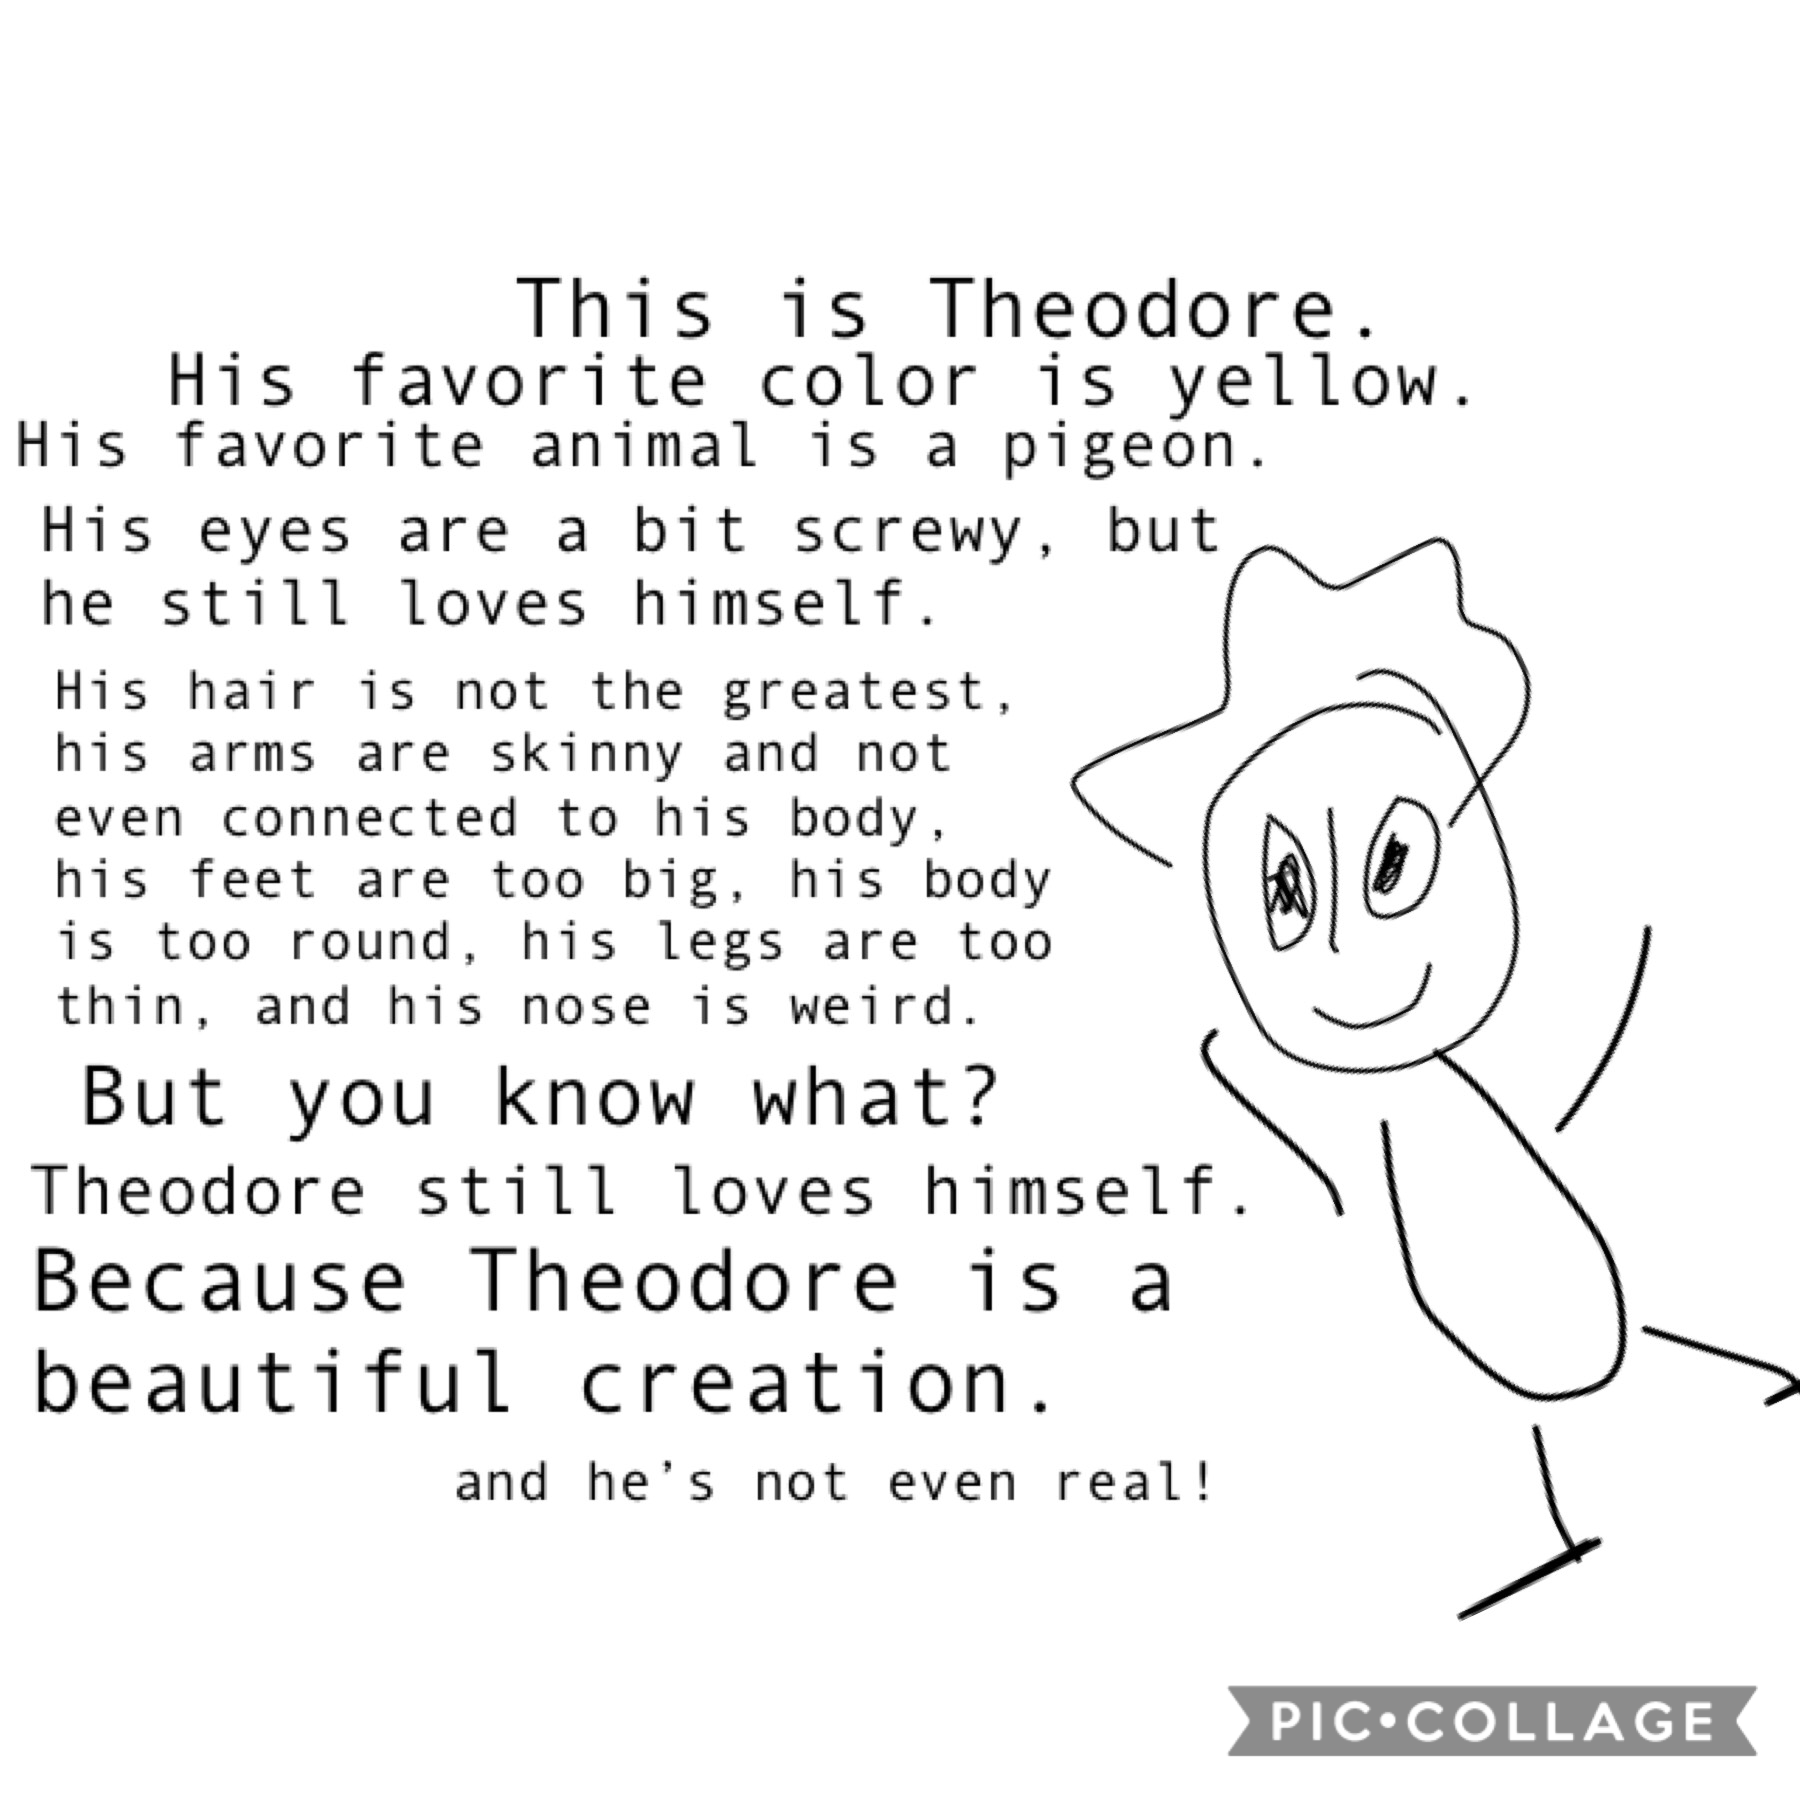 💕😂💕
I don’t know why I did this
But it’s beautiful
I’m beautiful
Theodore is beautiful
And all of you are beautiful 
Yes, even if you’re a guy. 
You’re still beautiful. 
And I love you all. 
Peace out. 
